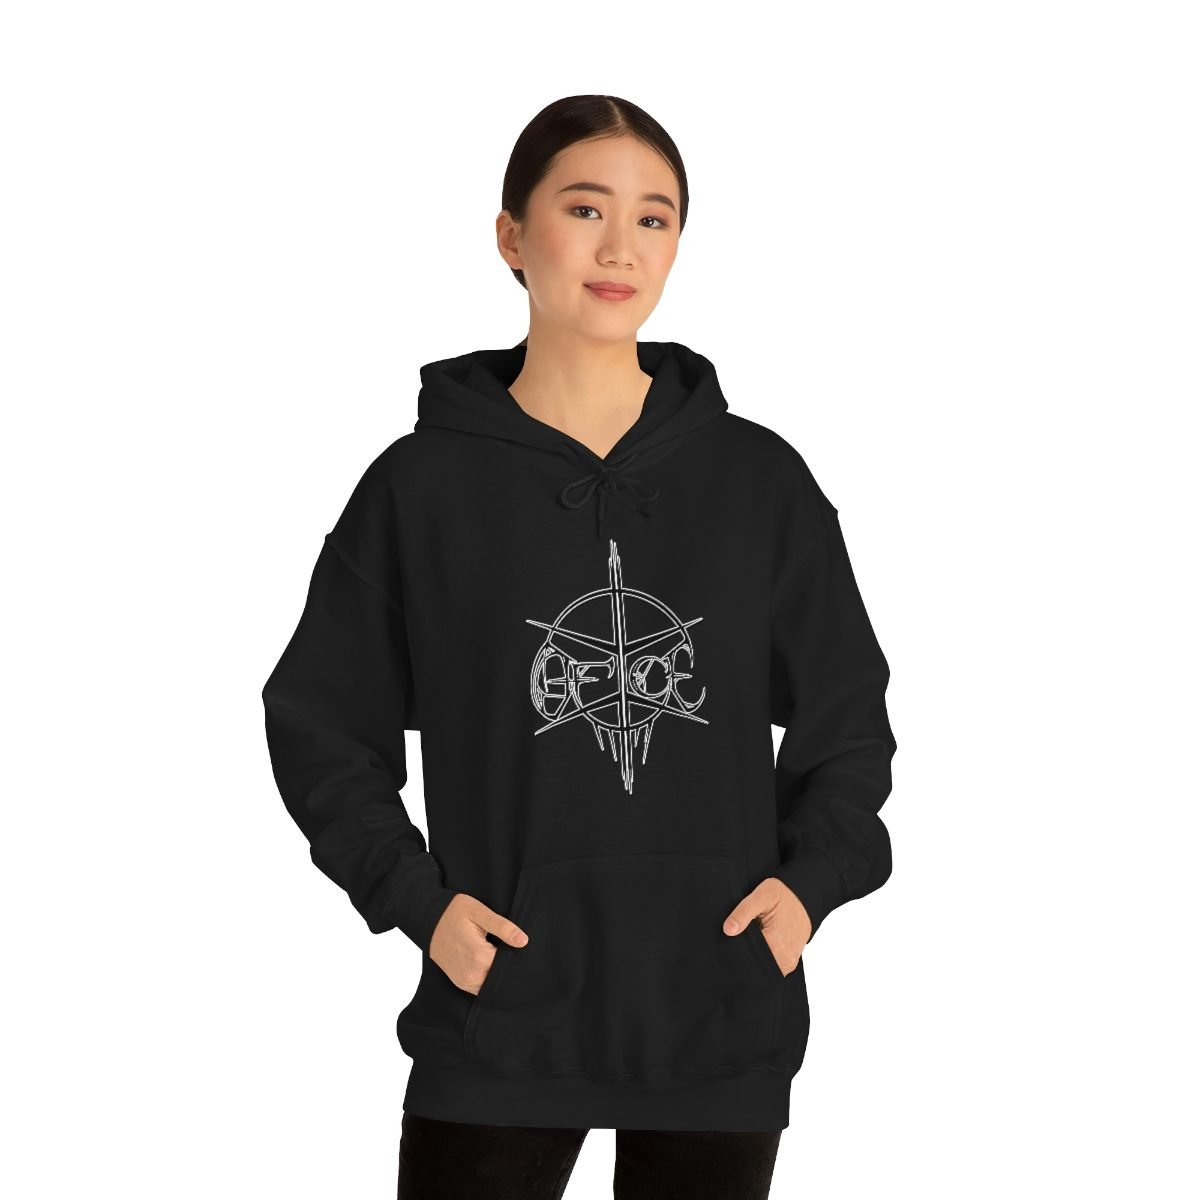 Of Ice Outlined Logo Pullover Hooded Sweatshirt